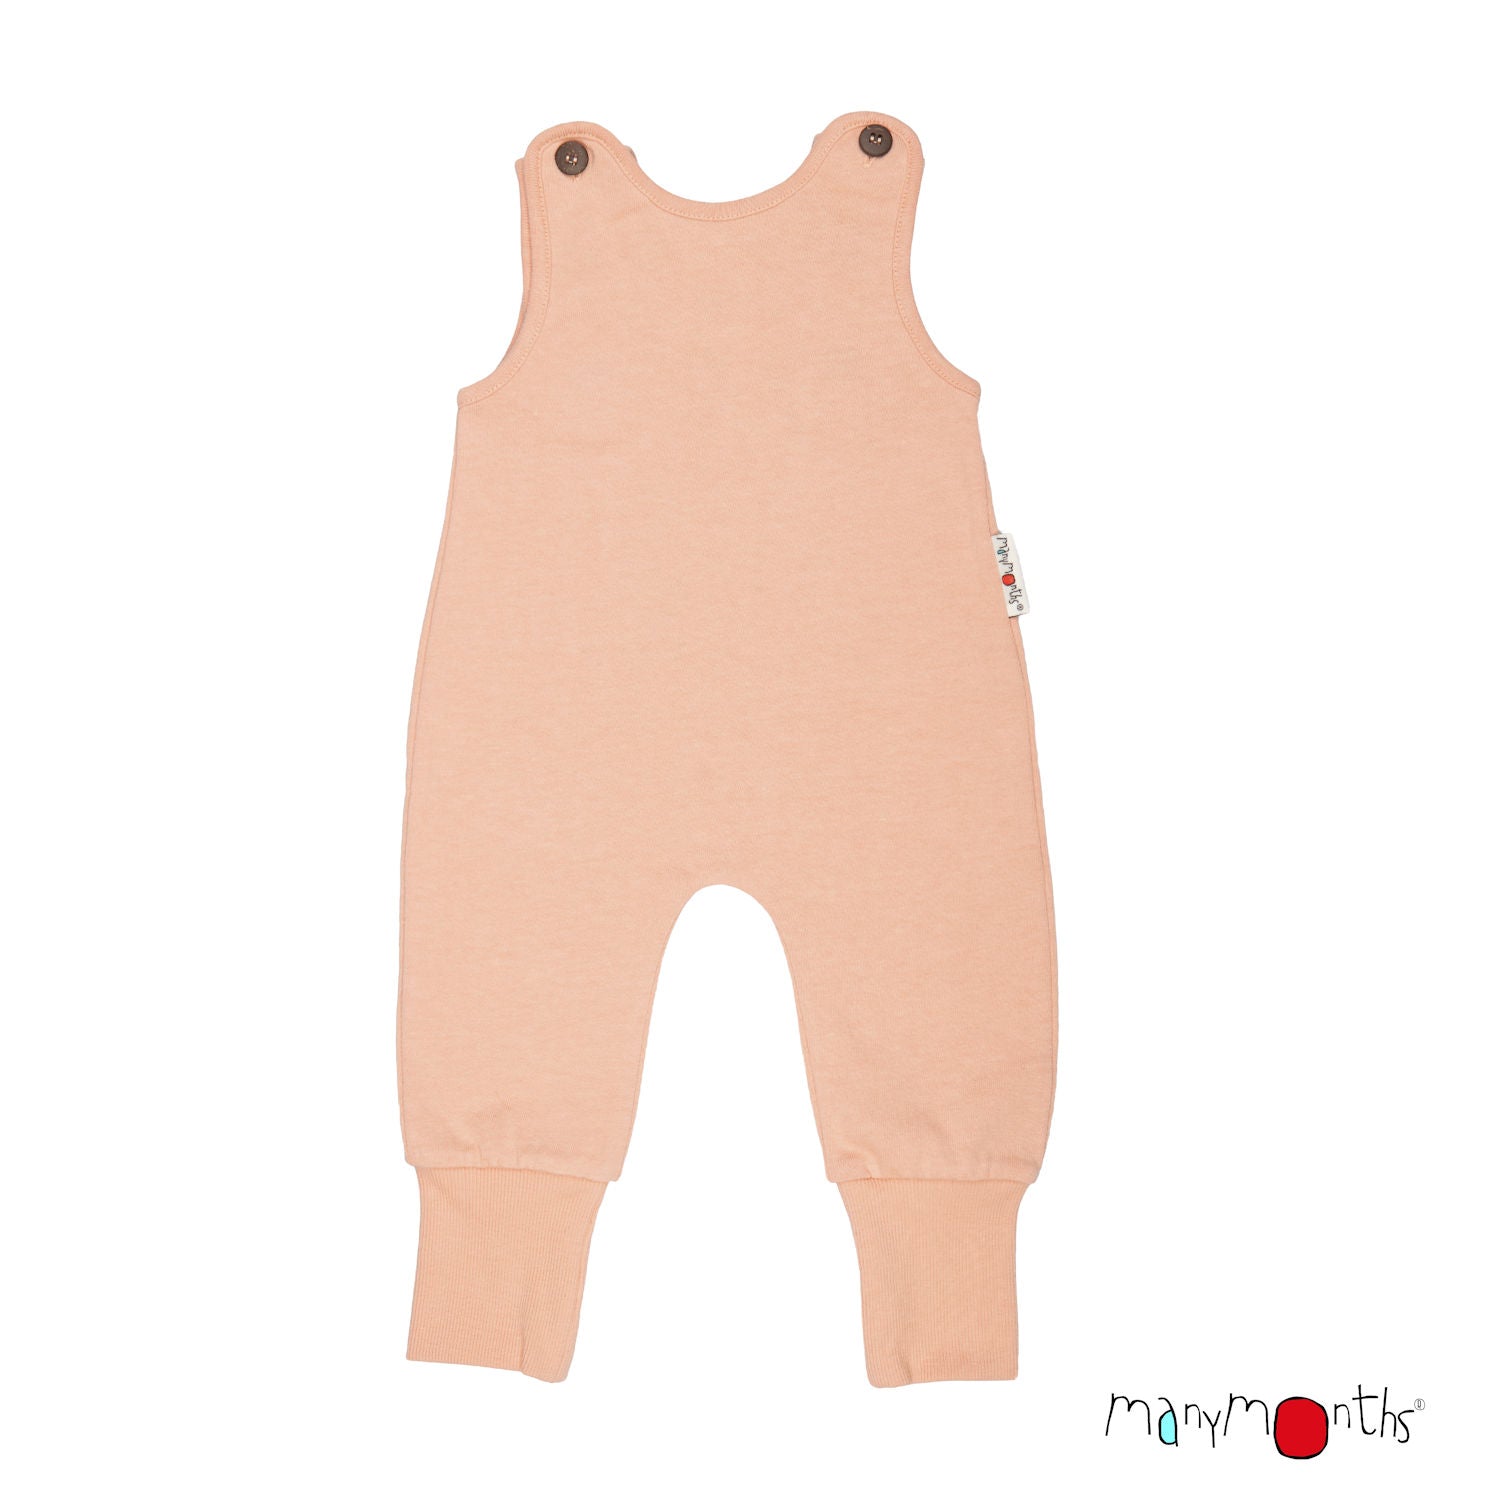 ManyMonths Romper Playsuit Hanf - Apricot Cheese - Familienbande